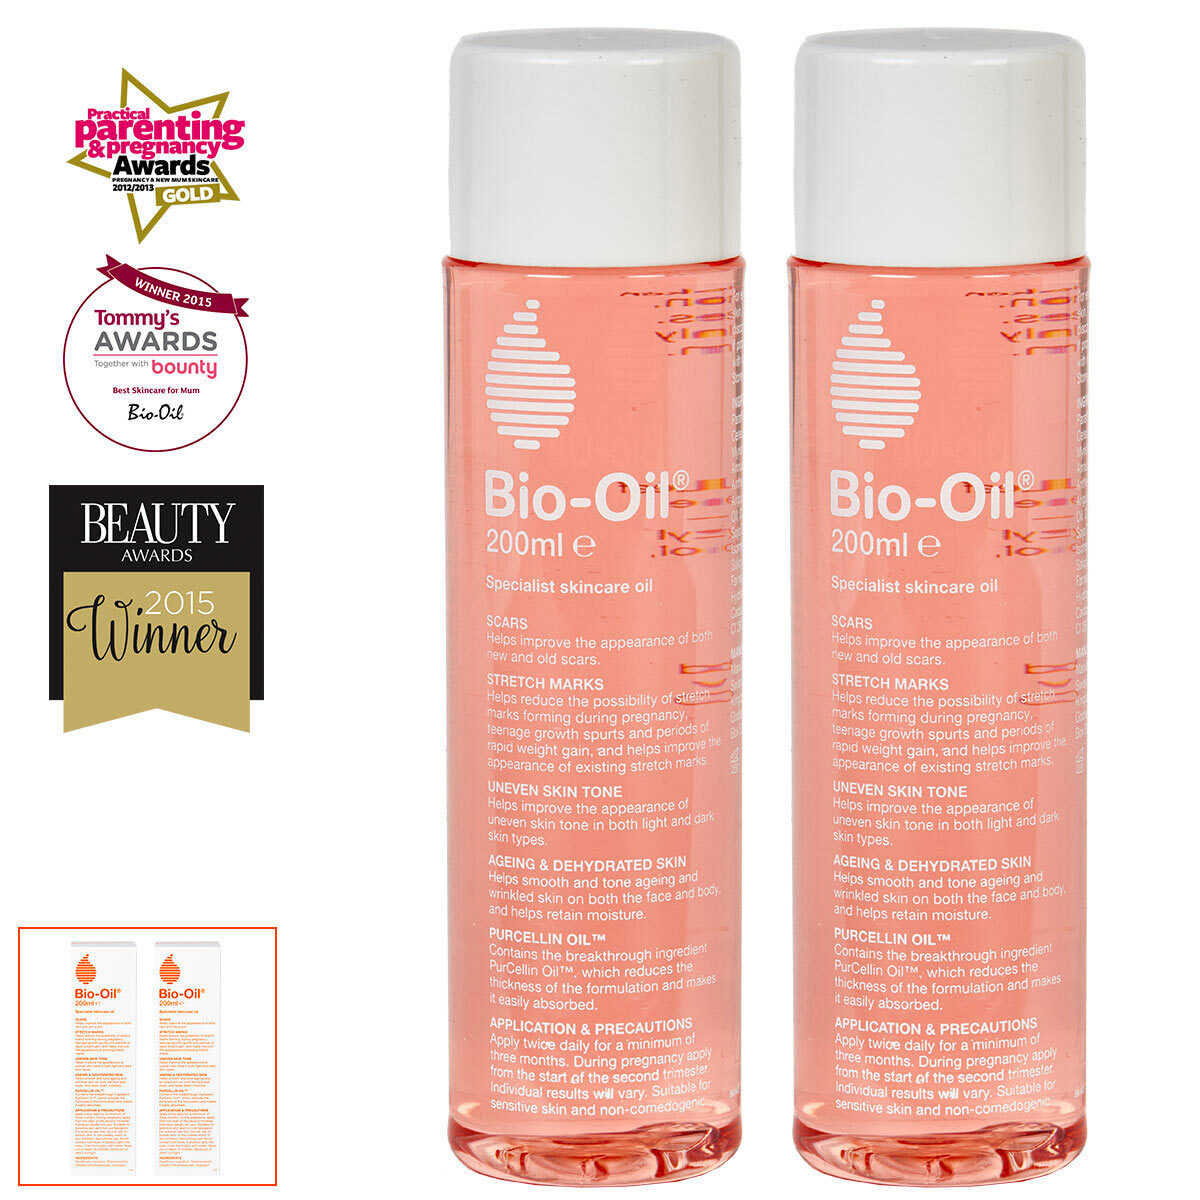 2 bottles of bio oil with awards